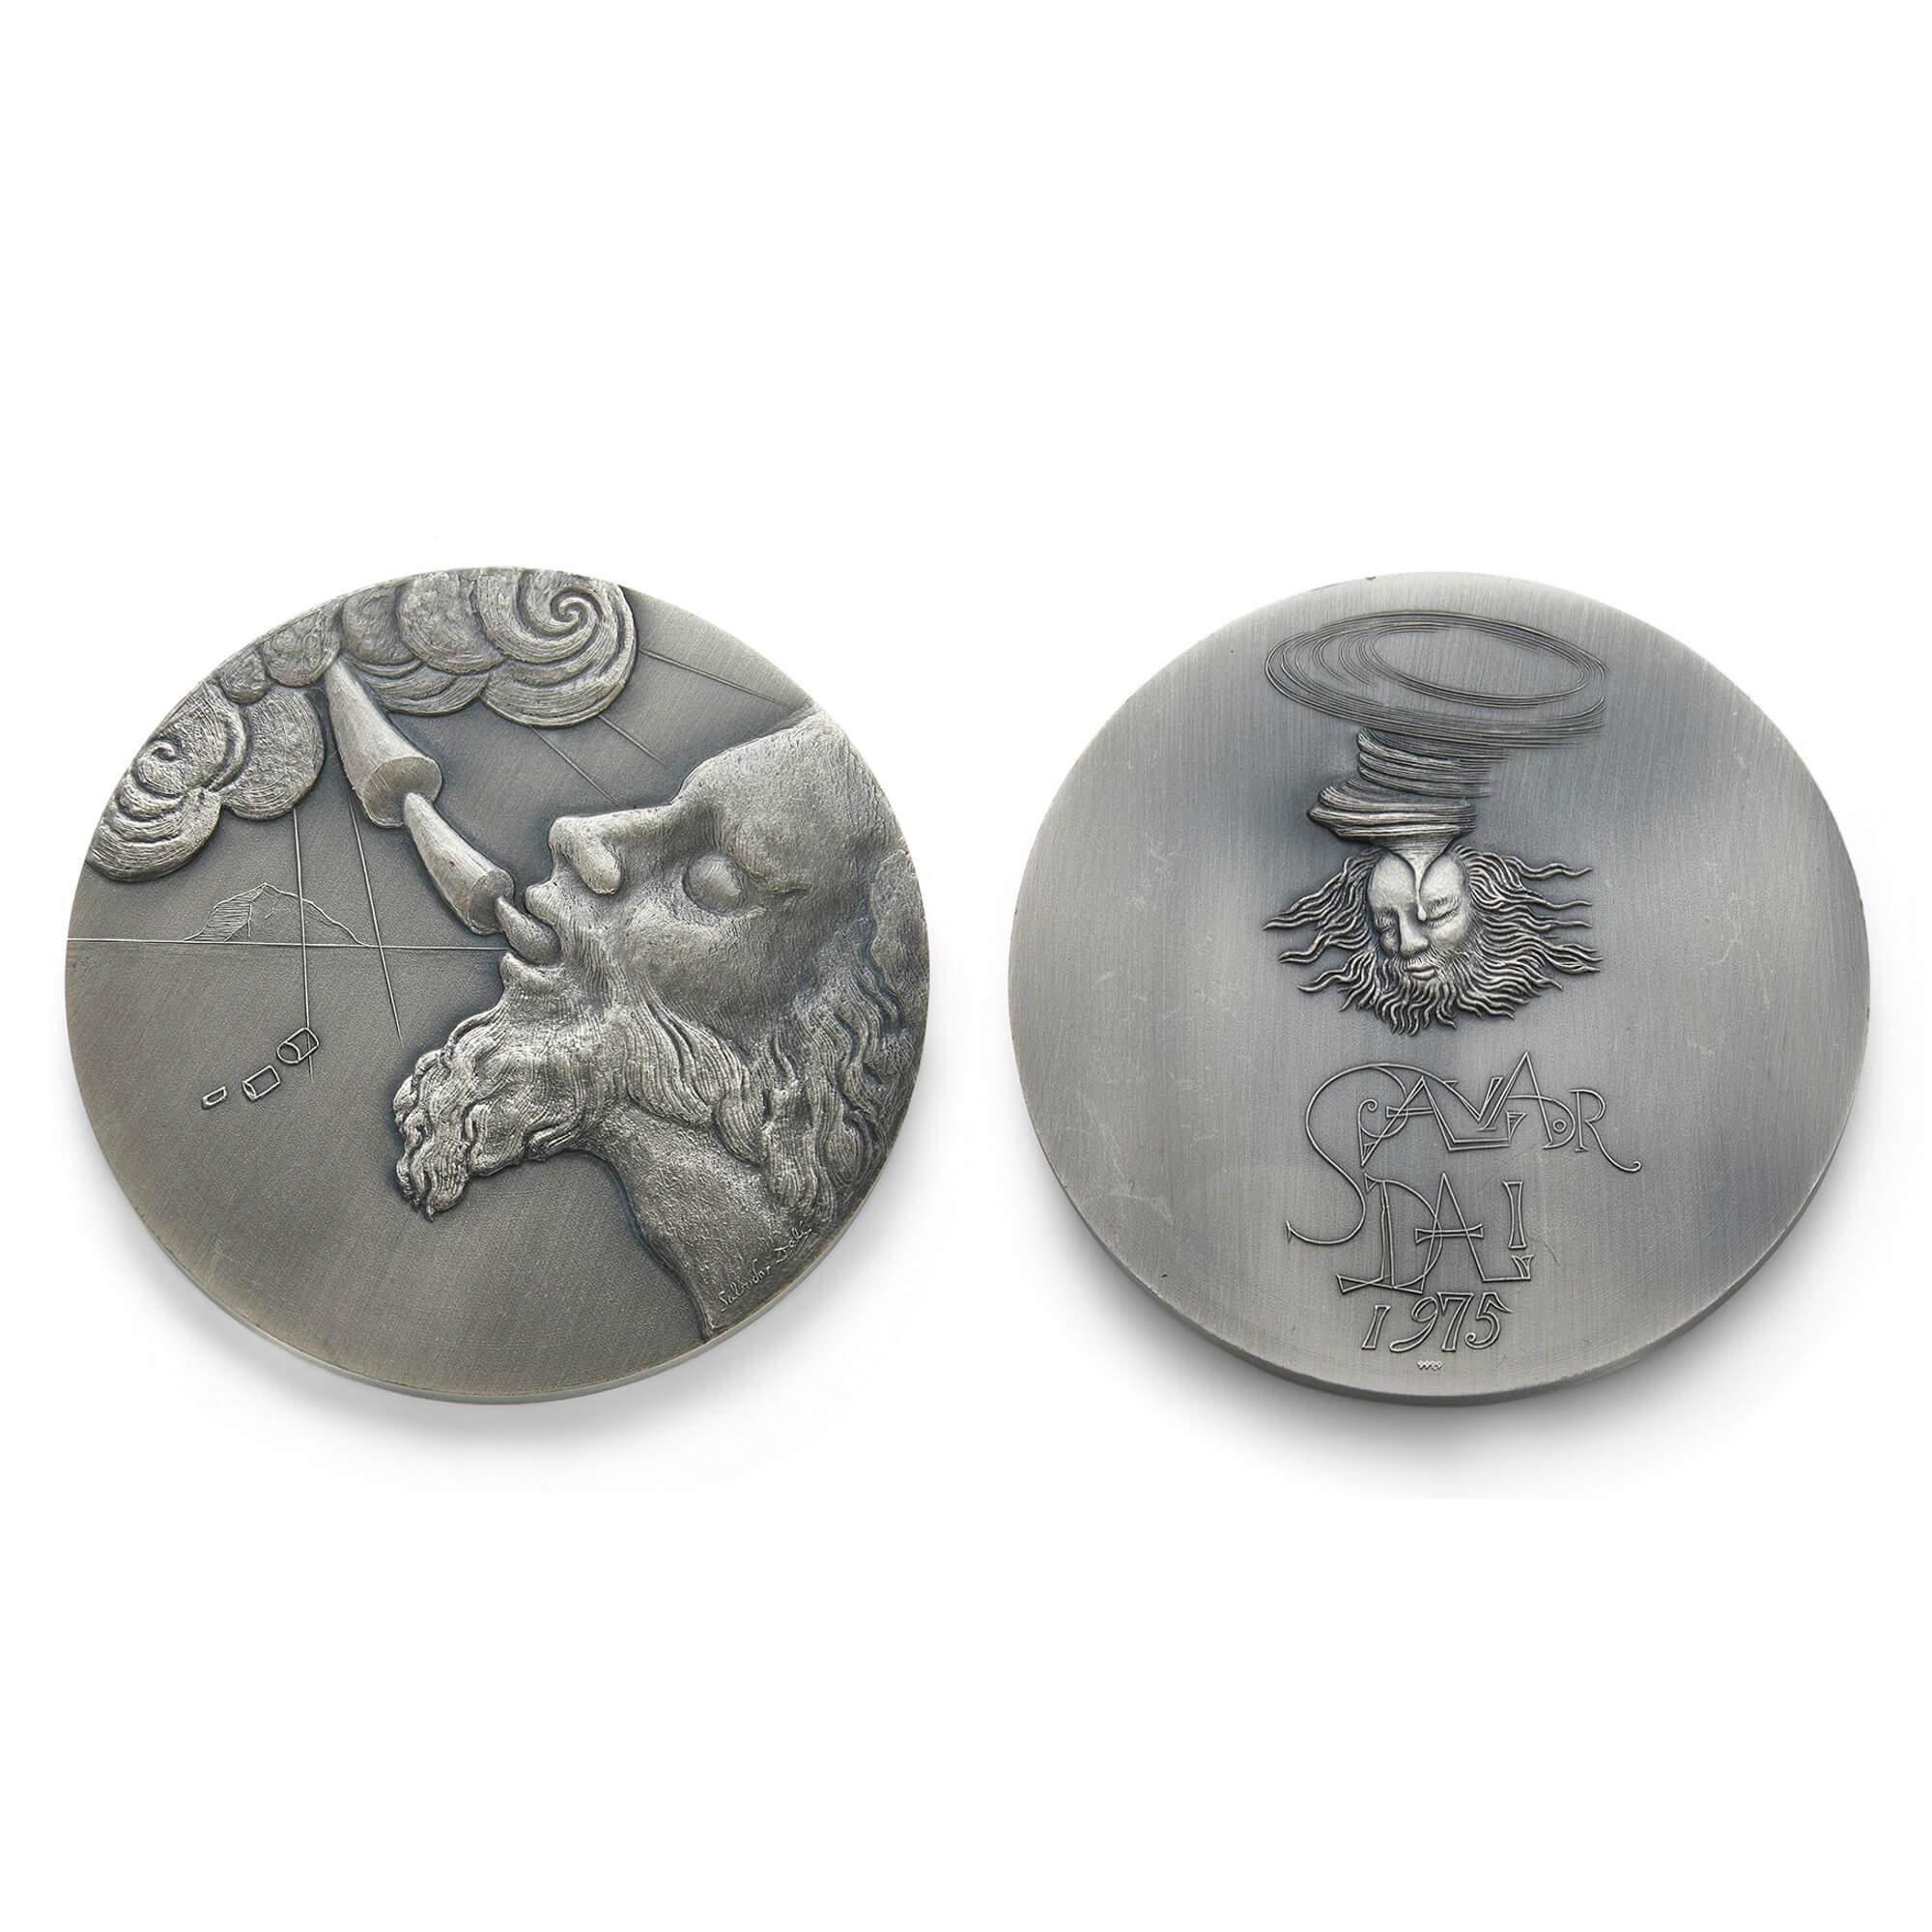 ‘The Ten Commandments’ silver medal set by Salvador Dalí
Spanish, 1975
Height 0.5cm, diameter 10cm

The unusual and rare collection of pure silver medals was designed by Salvador Dali (1904-1989) who was one of the most important and famous figures